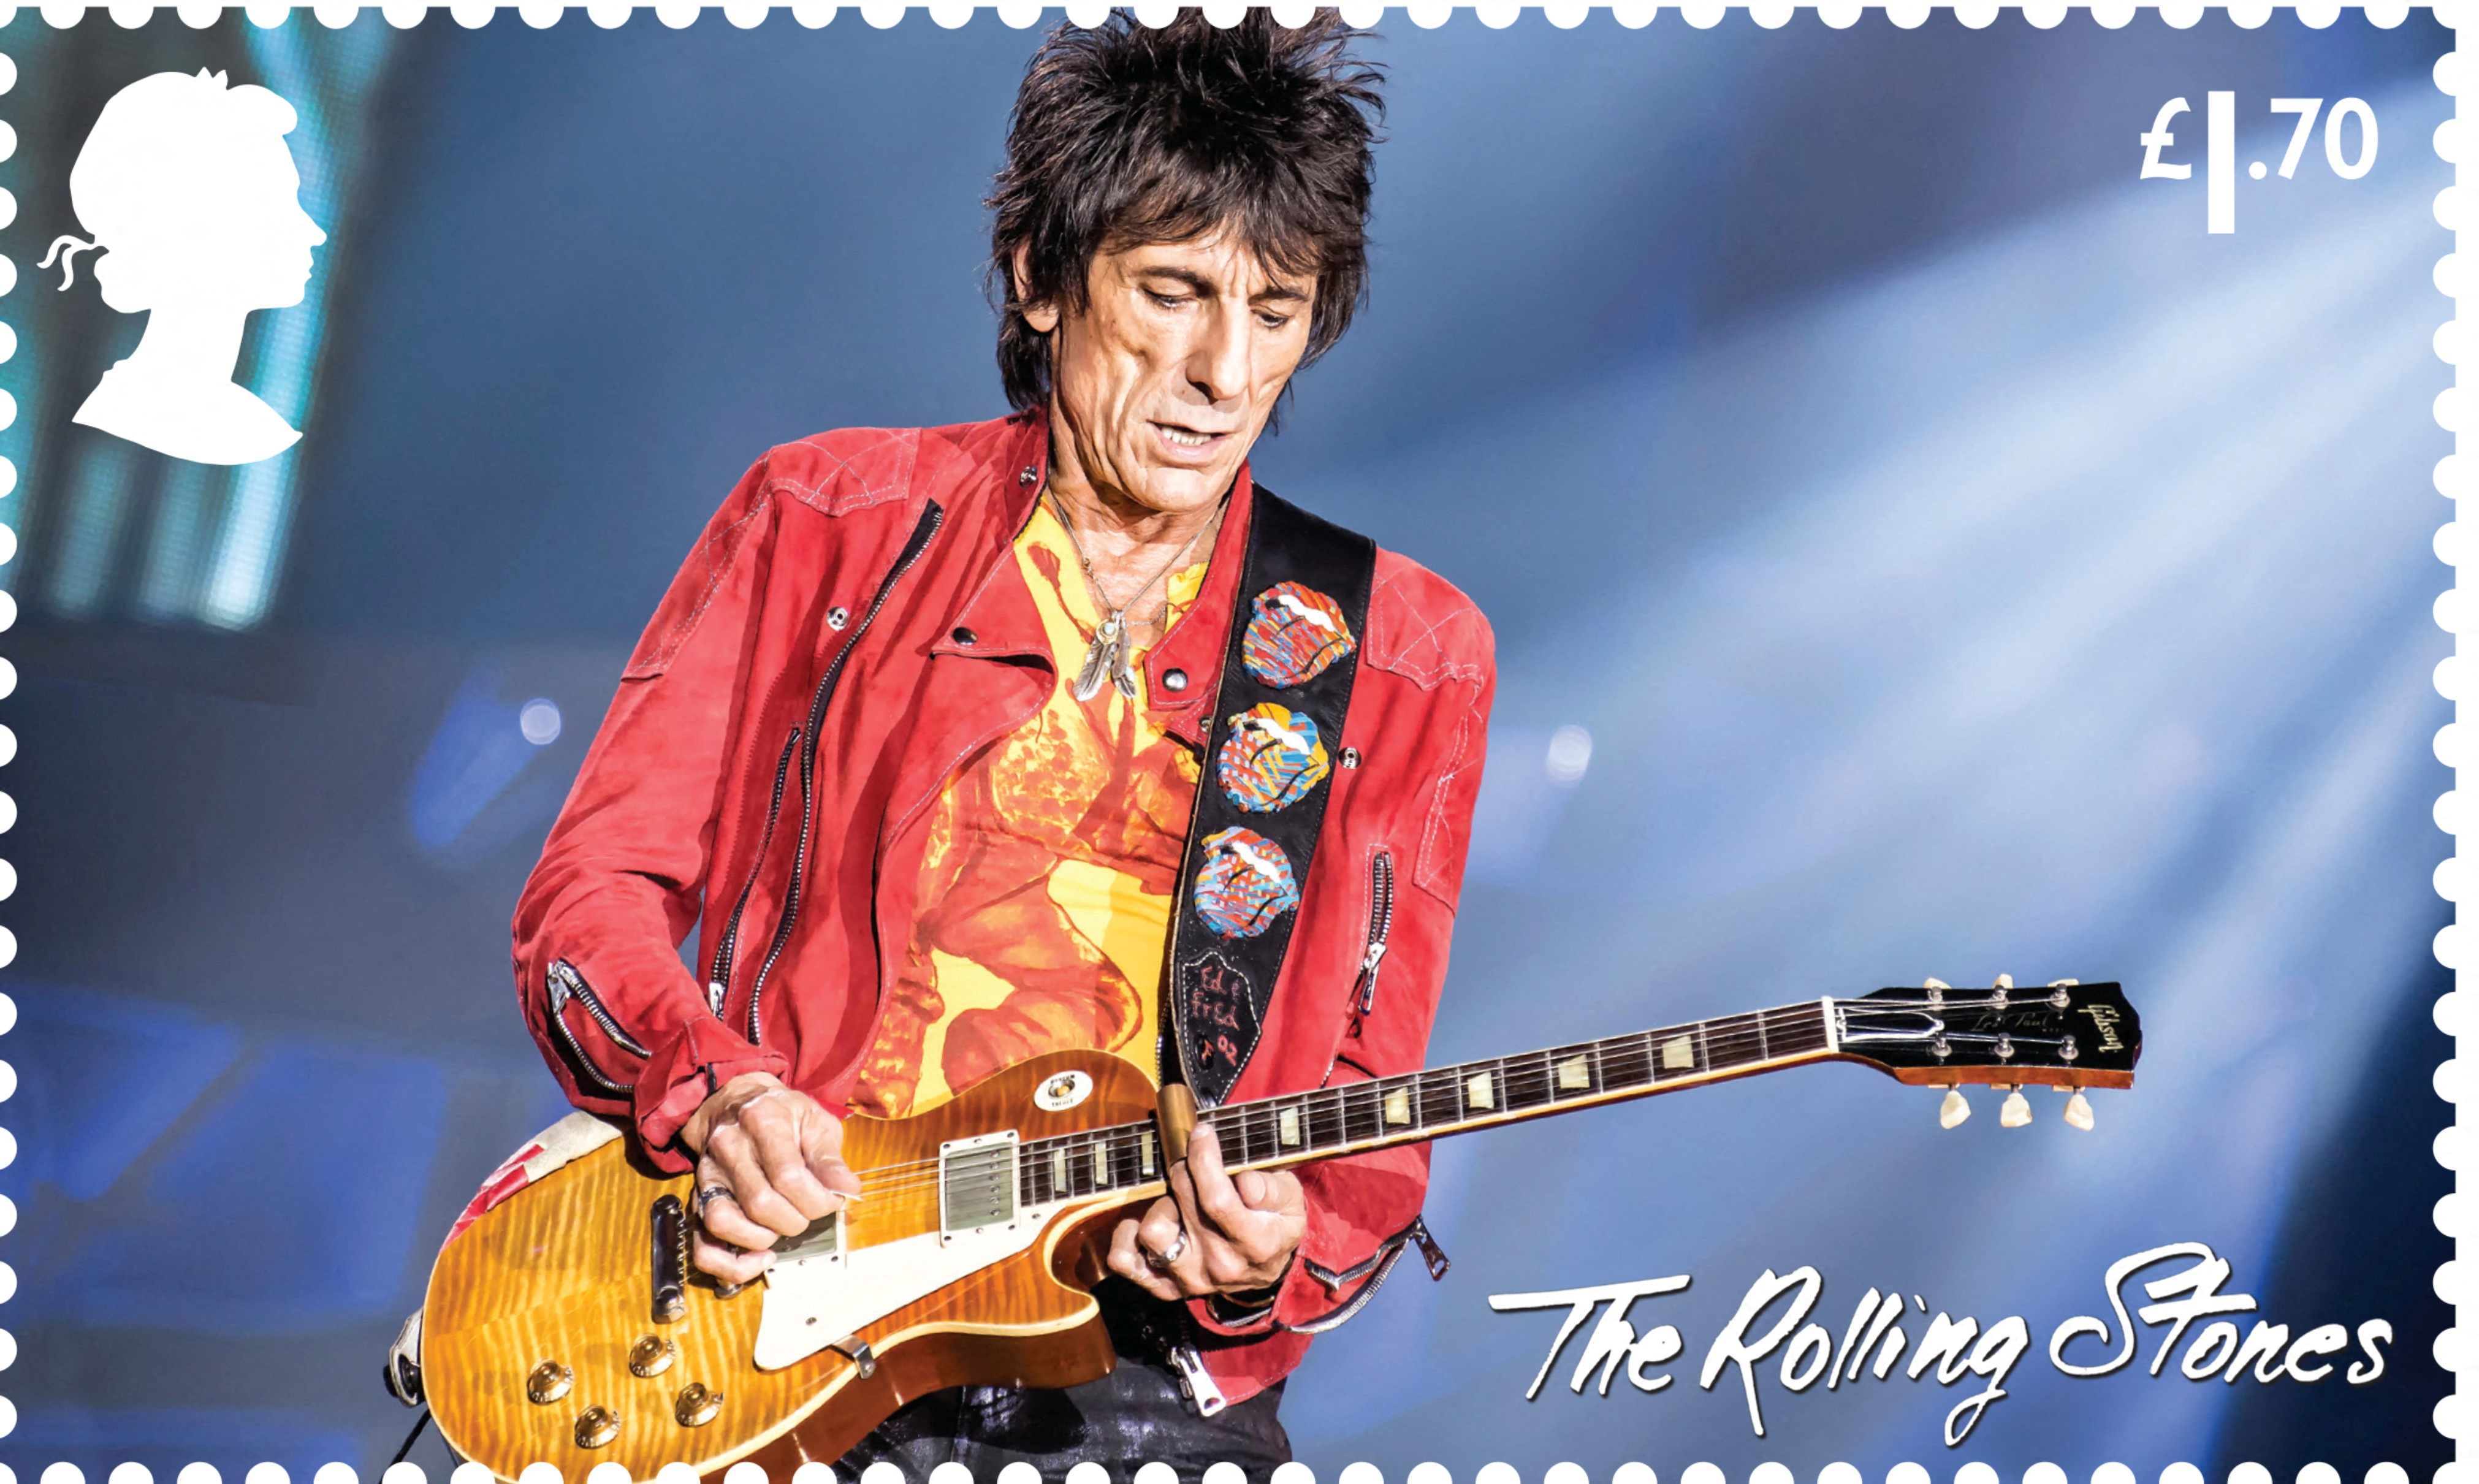 One of the dedicated Royal Mail stamps to honour 60 years of the legendary rock group The Rolling Stones is seen in this undated handout image. Royal Mail/Handout via REUTERS